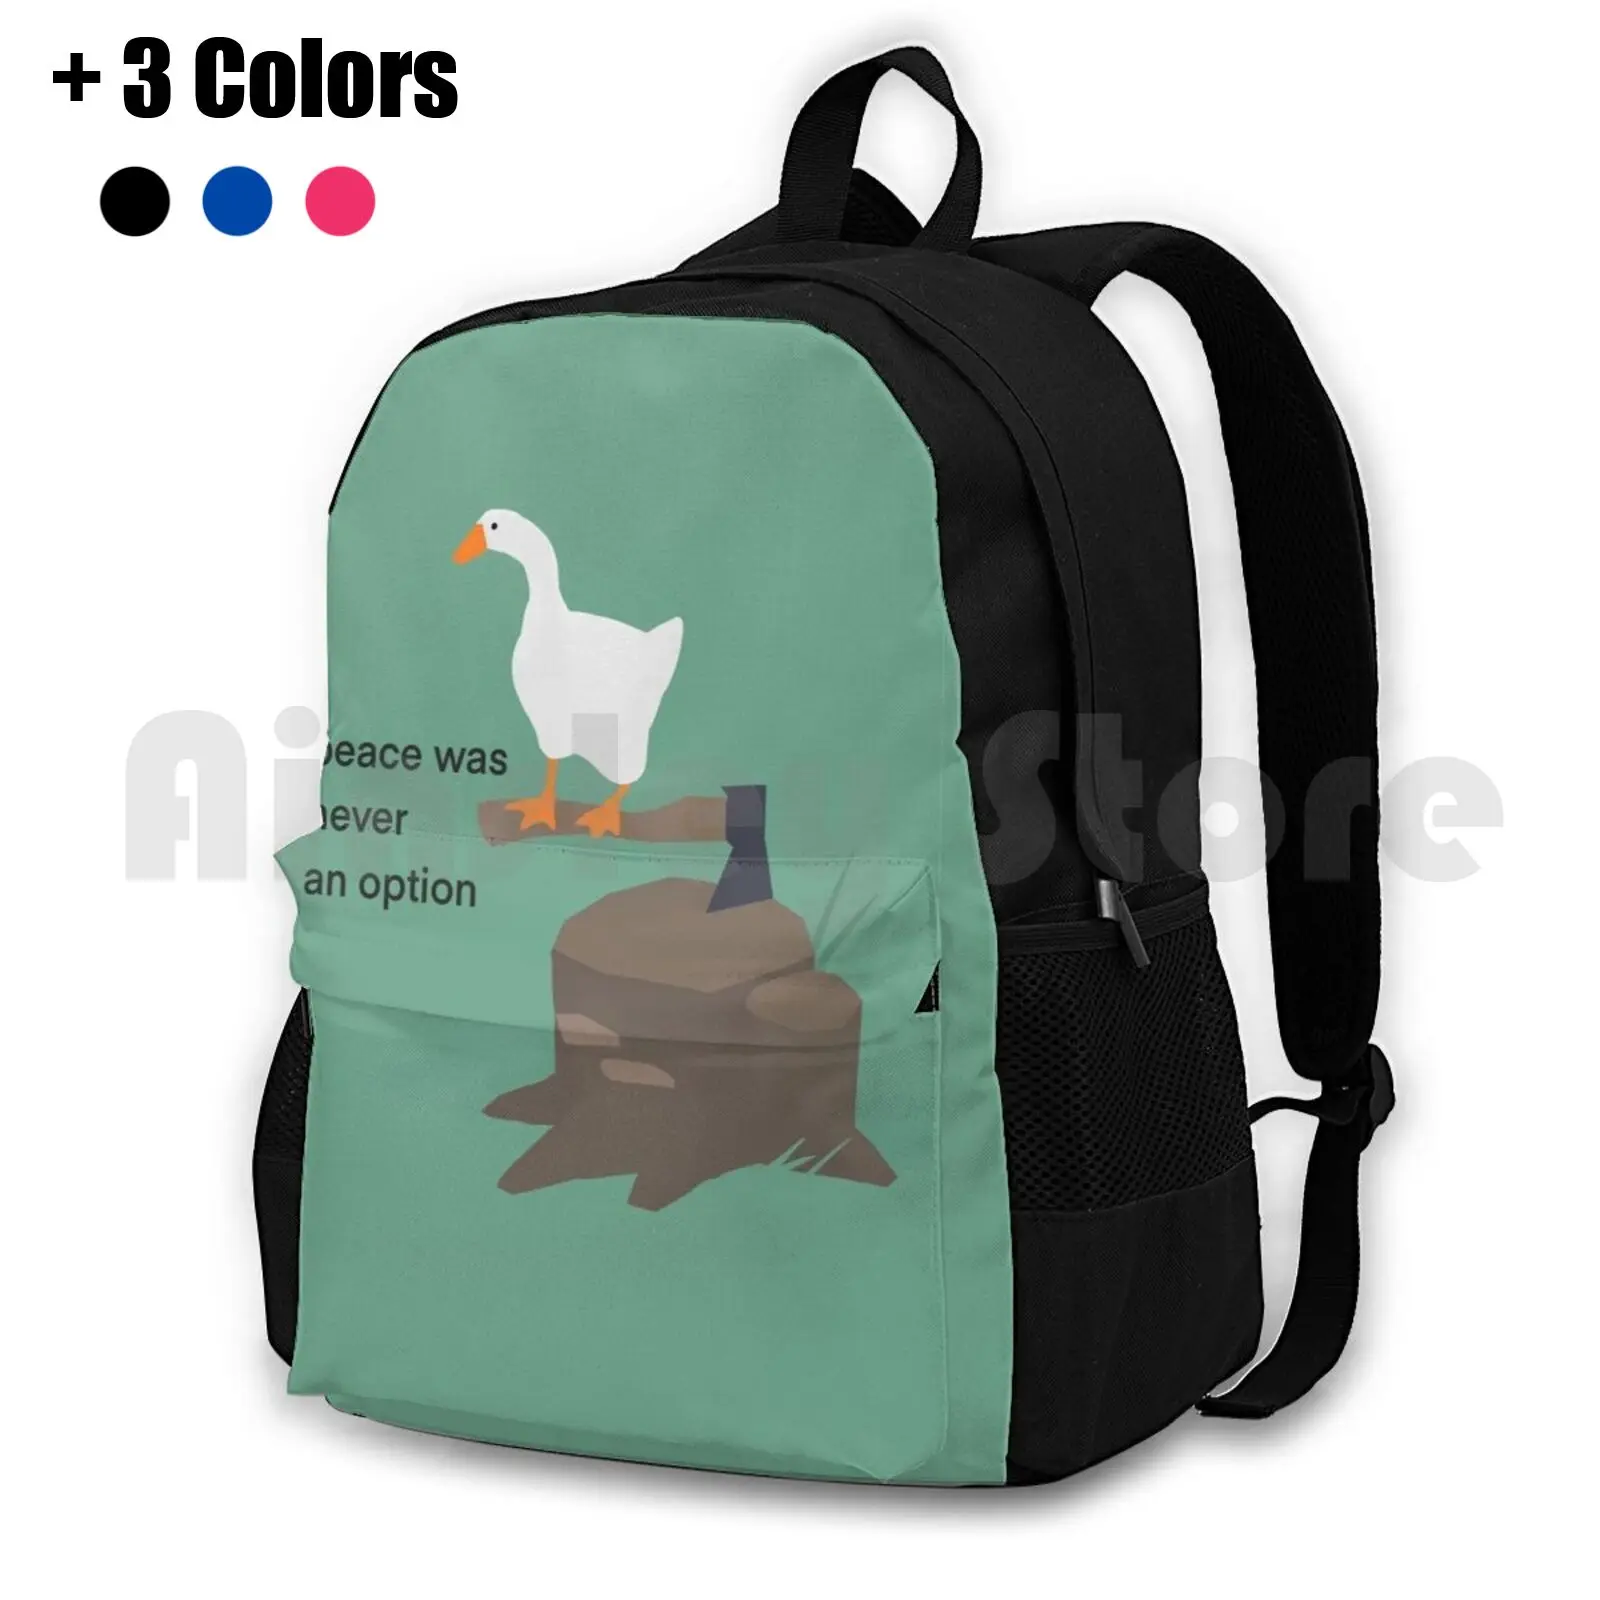 

Untitled Goose Game Meme : Peace Was Never An Option Outdoor Hiking Backpack Waterproof Camping Travel Untitled Goose Game Meme